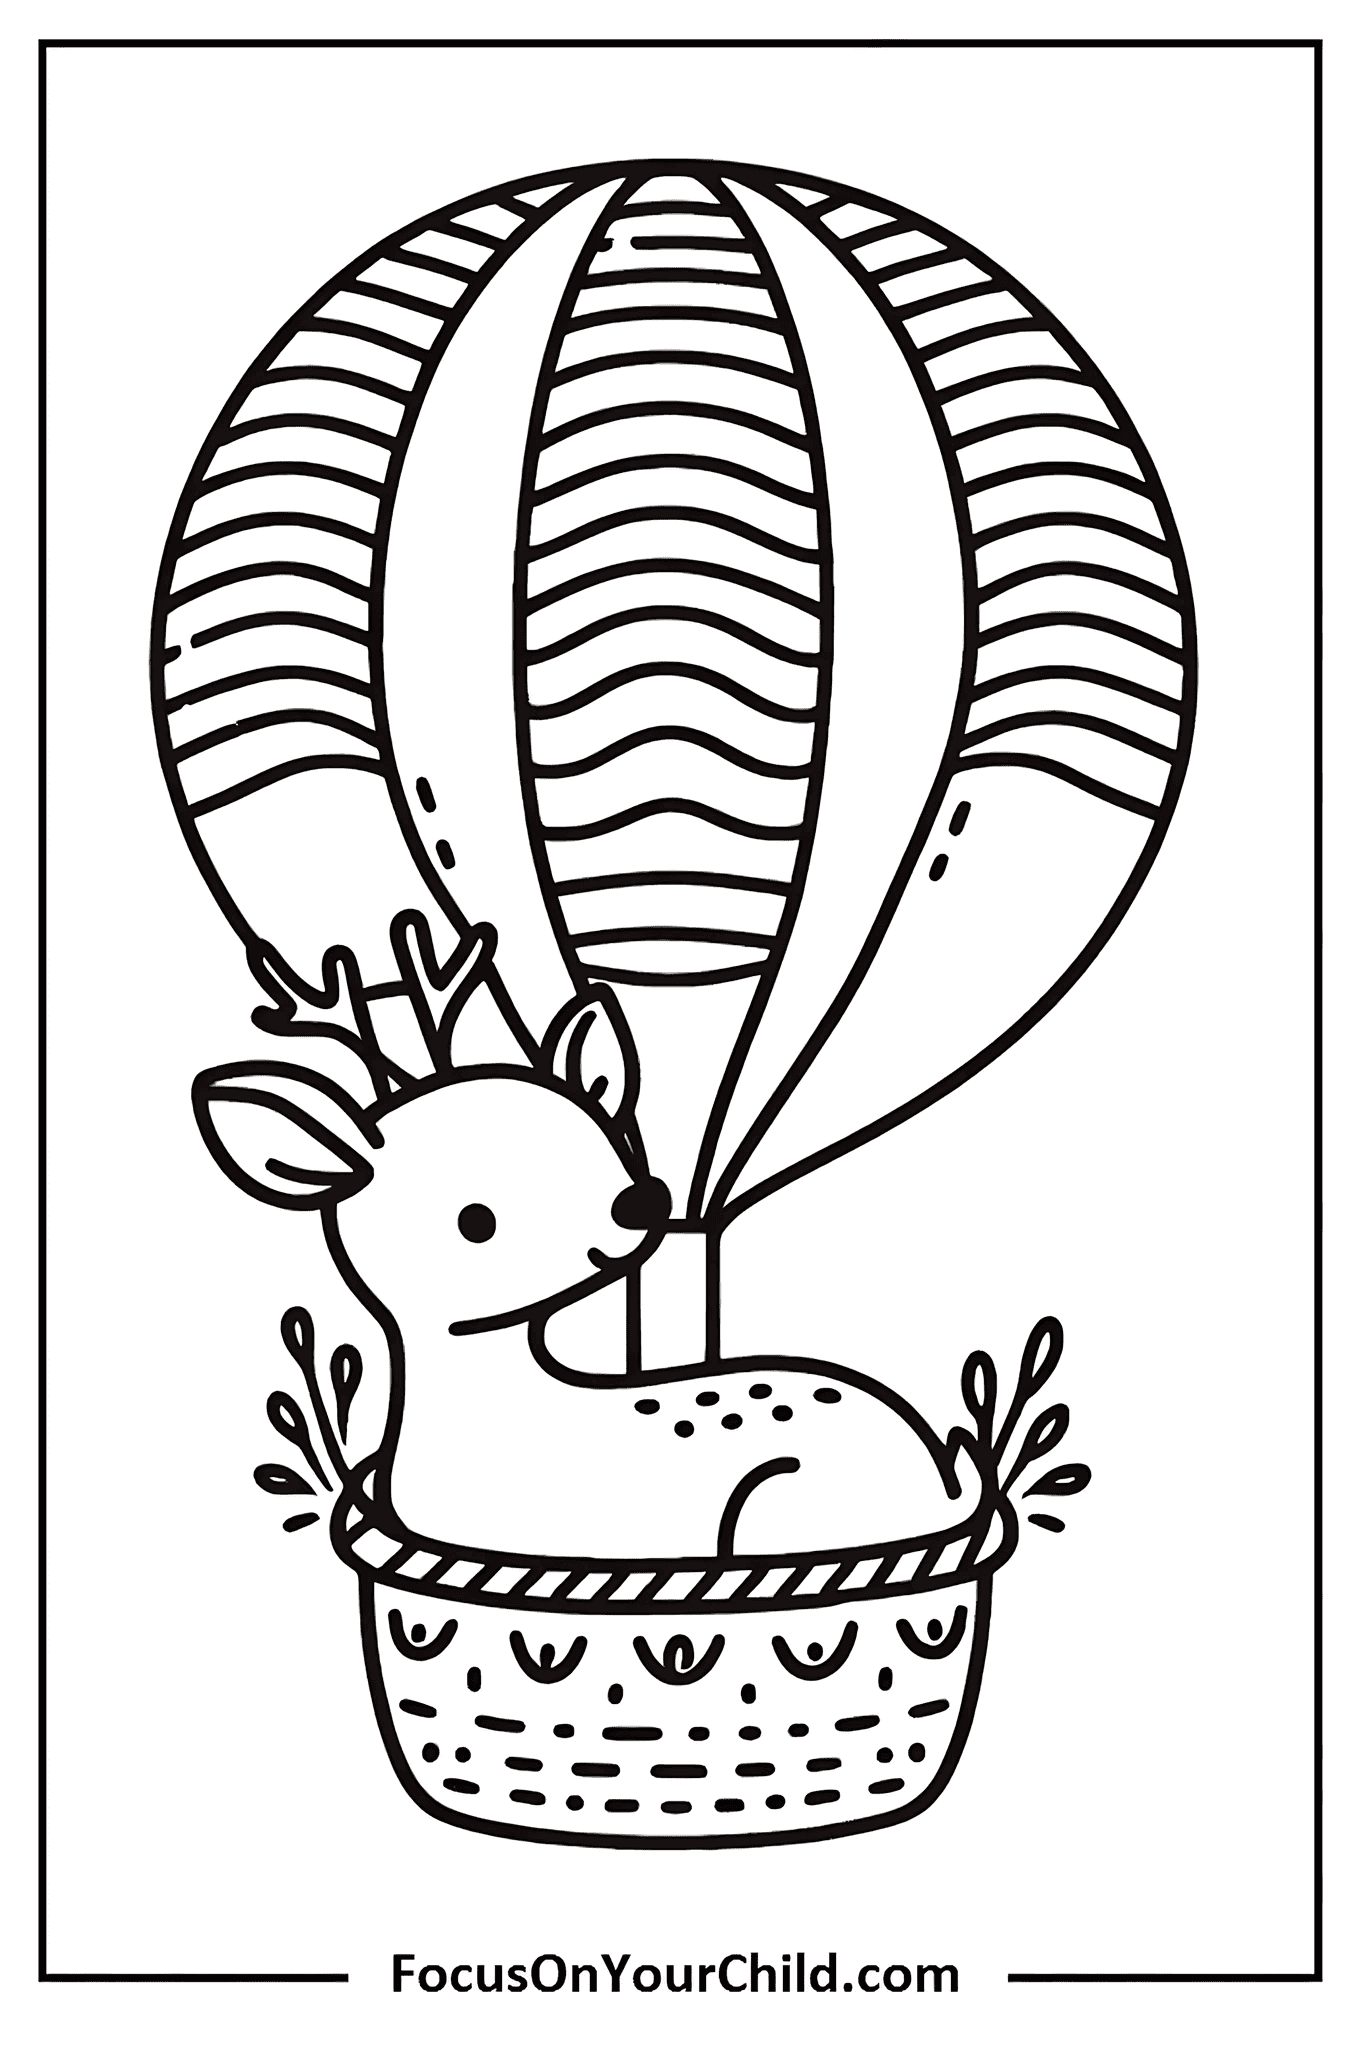 Whimsical black-and-white hot air balloon coloring page for kids.